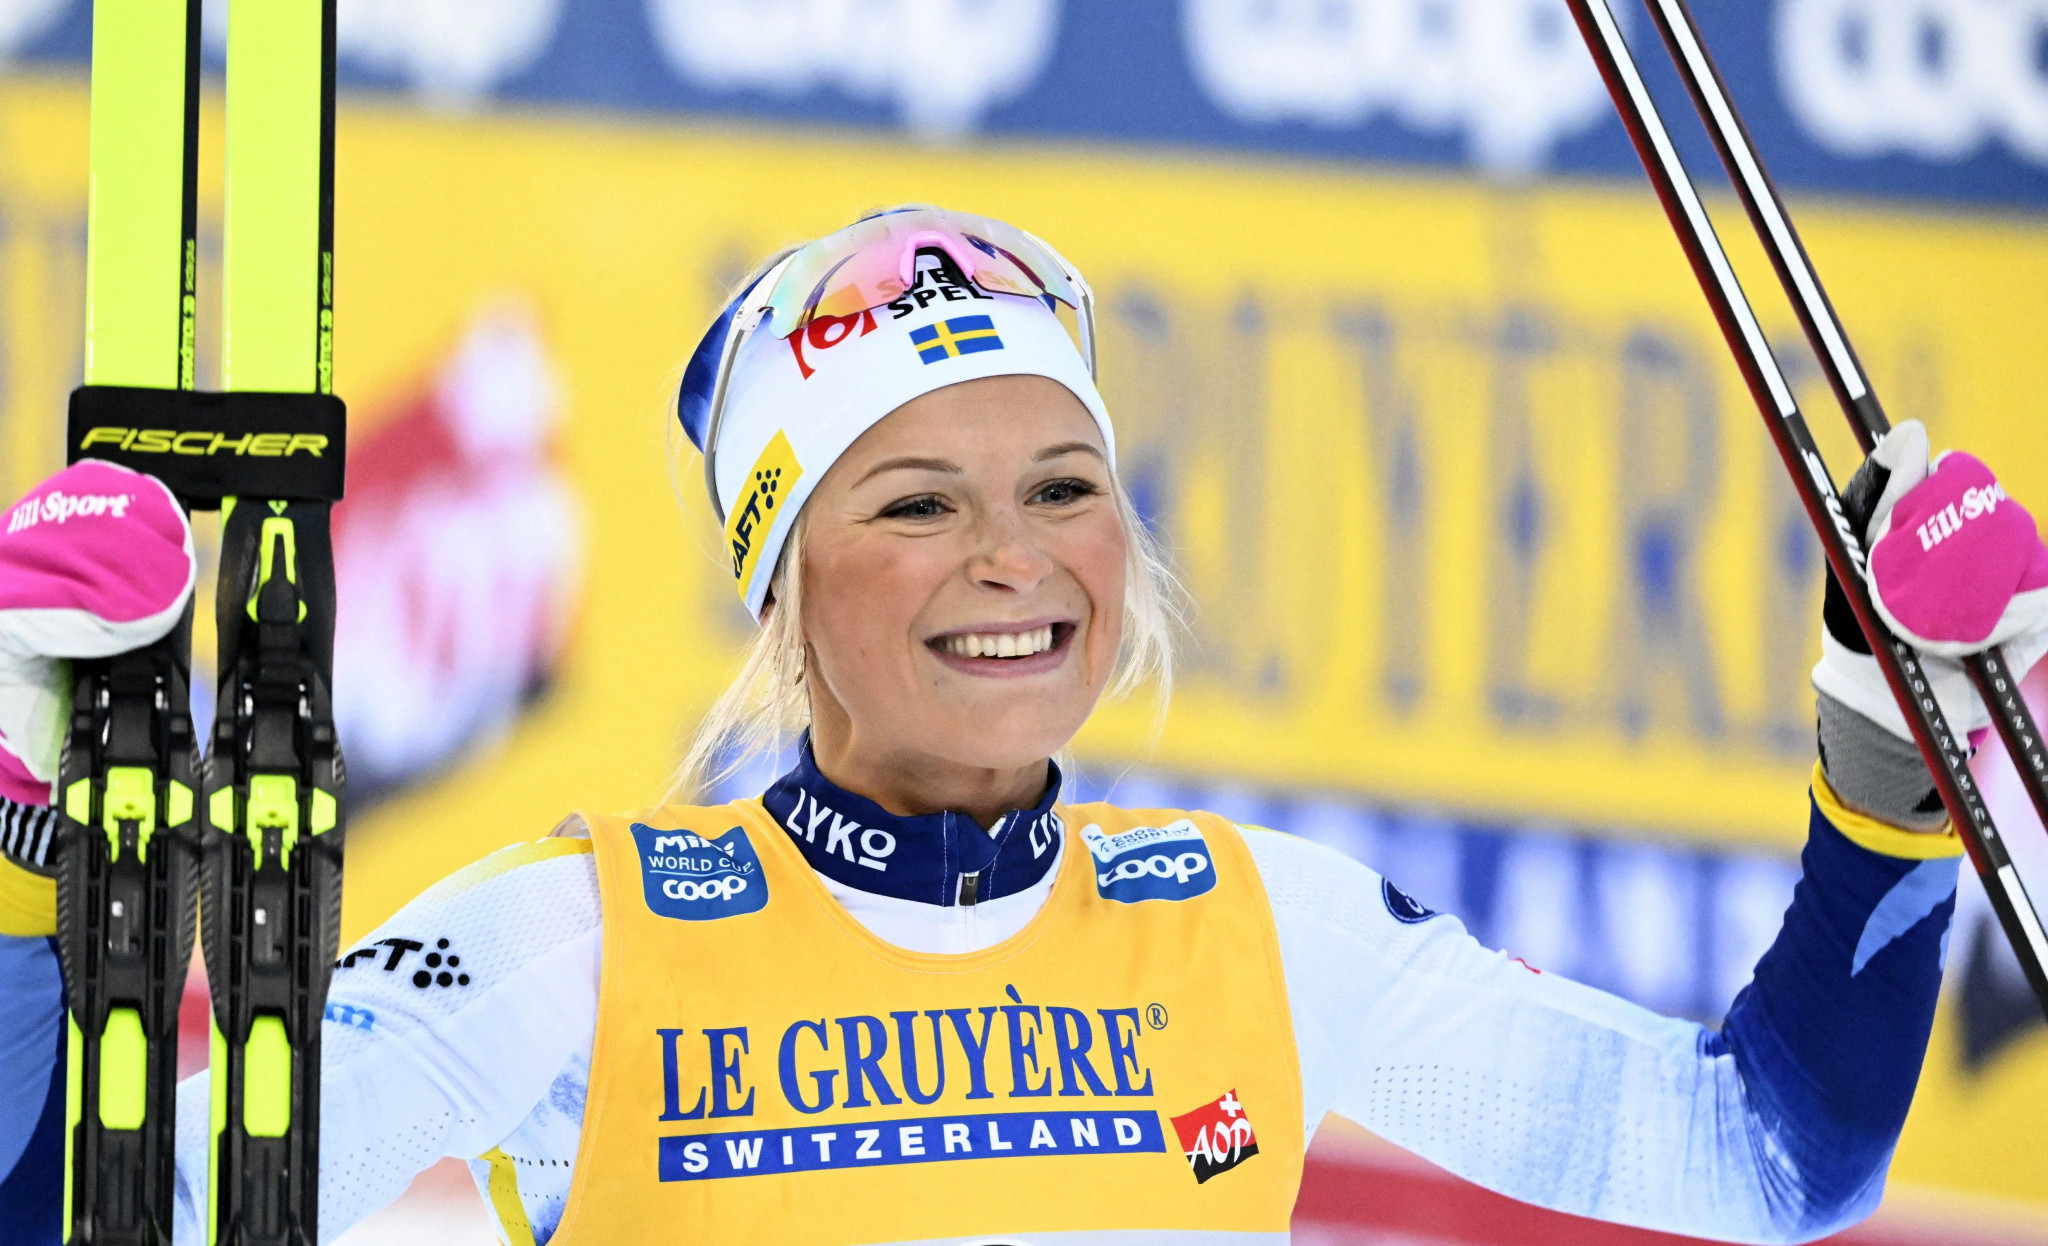 Frida Karlsson has taken the lead of the women's Tour de Ski standings ©Getty Images